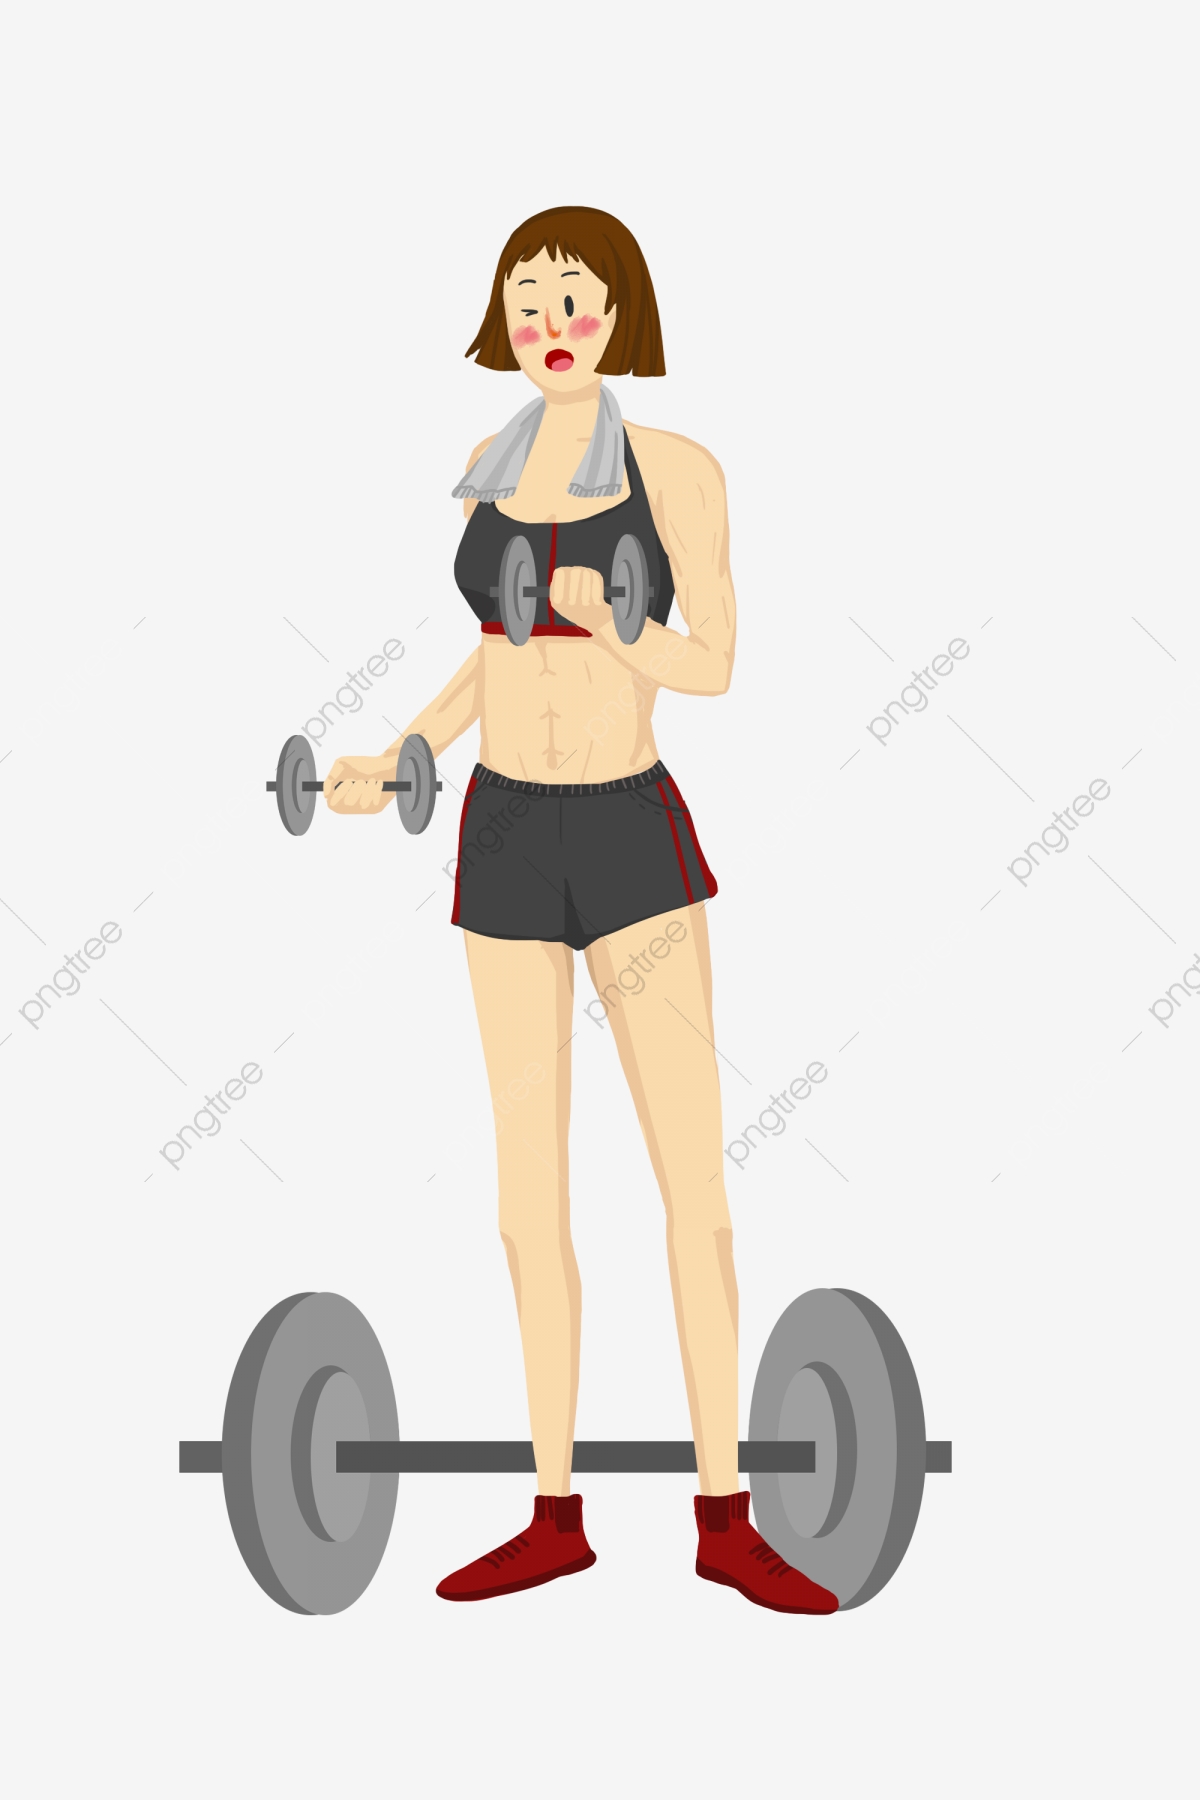 Dumbbells clipart fitness training. Hand painted holding a